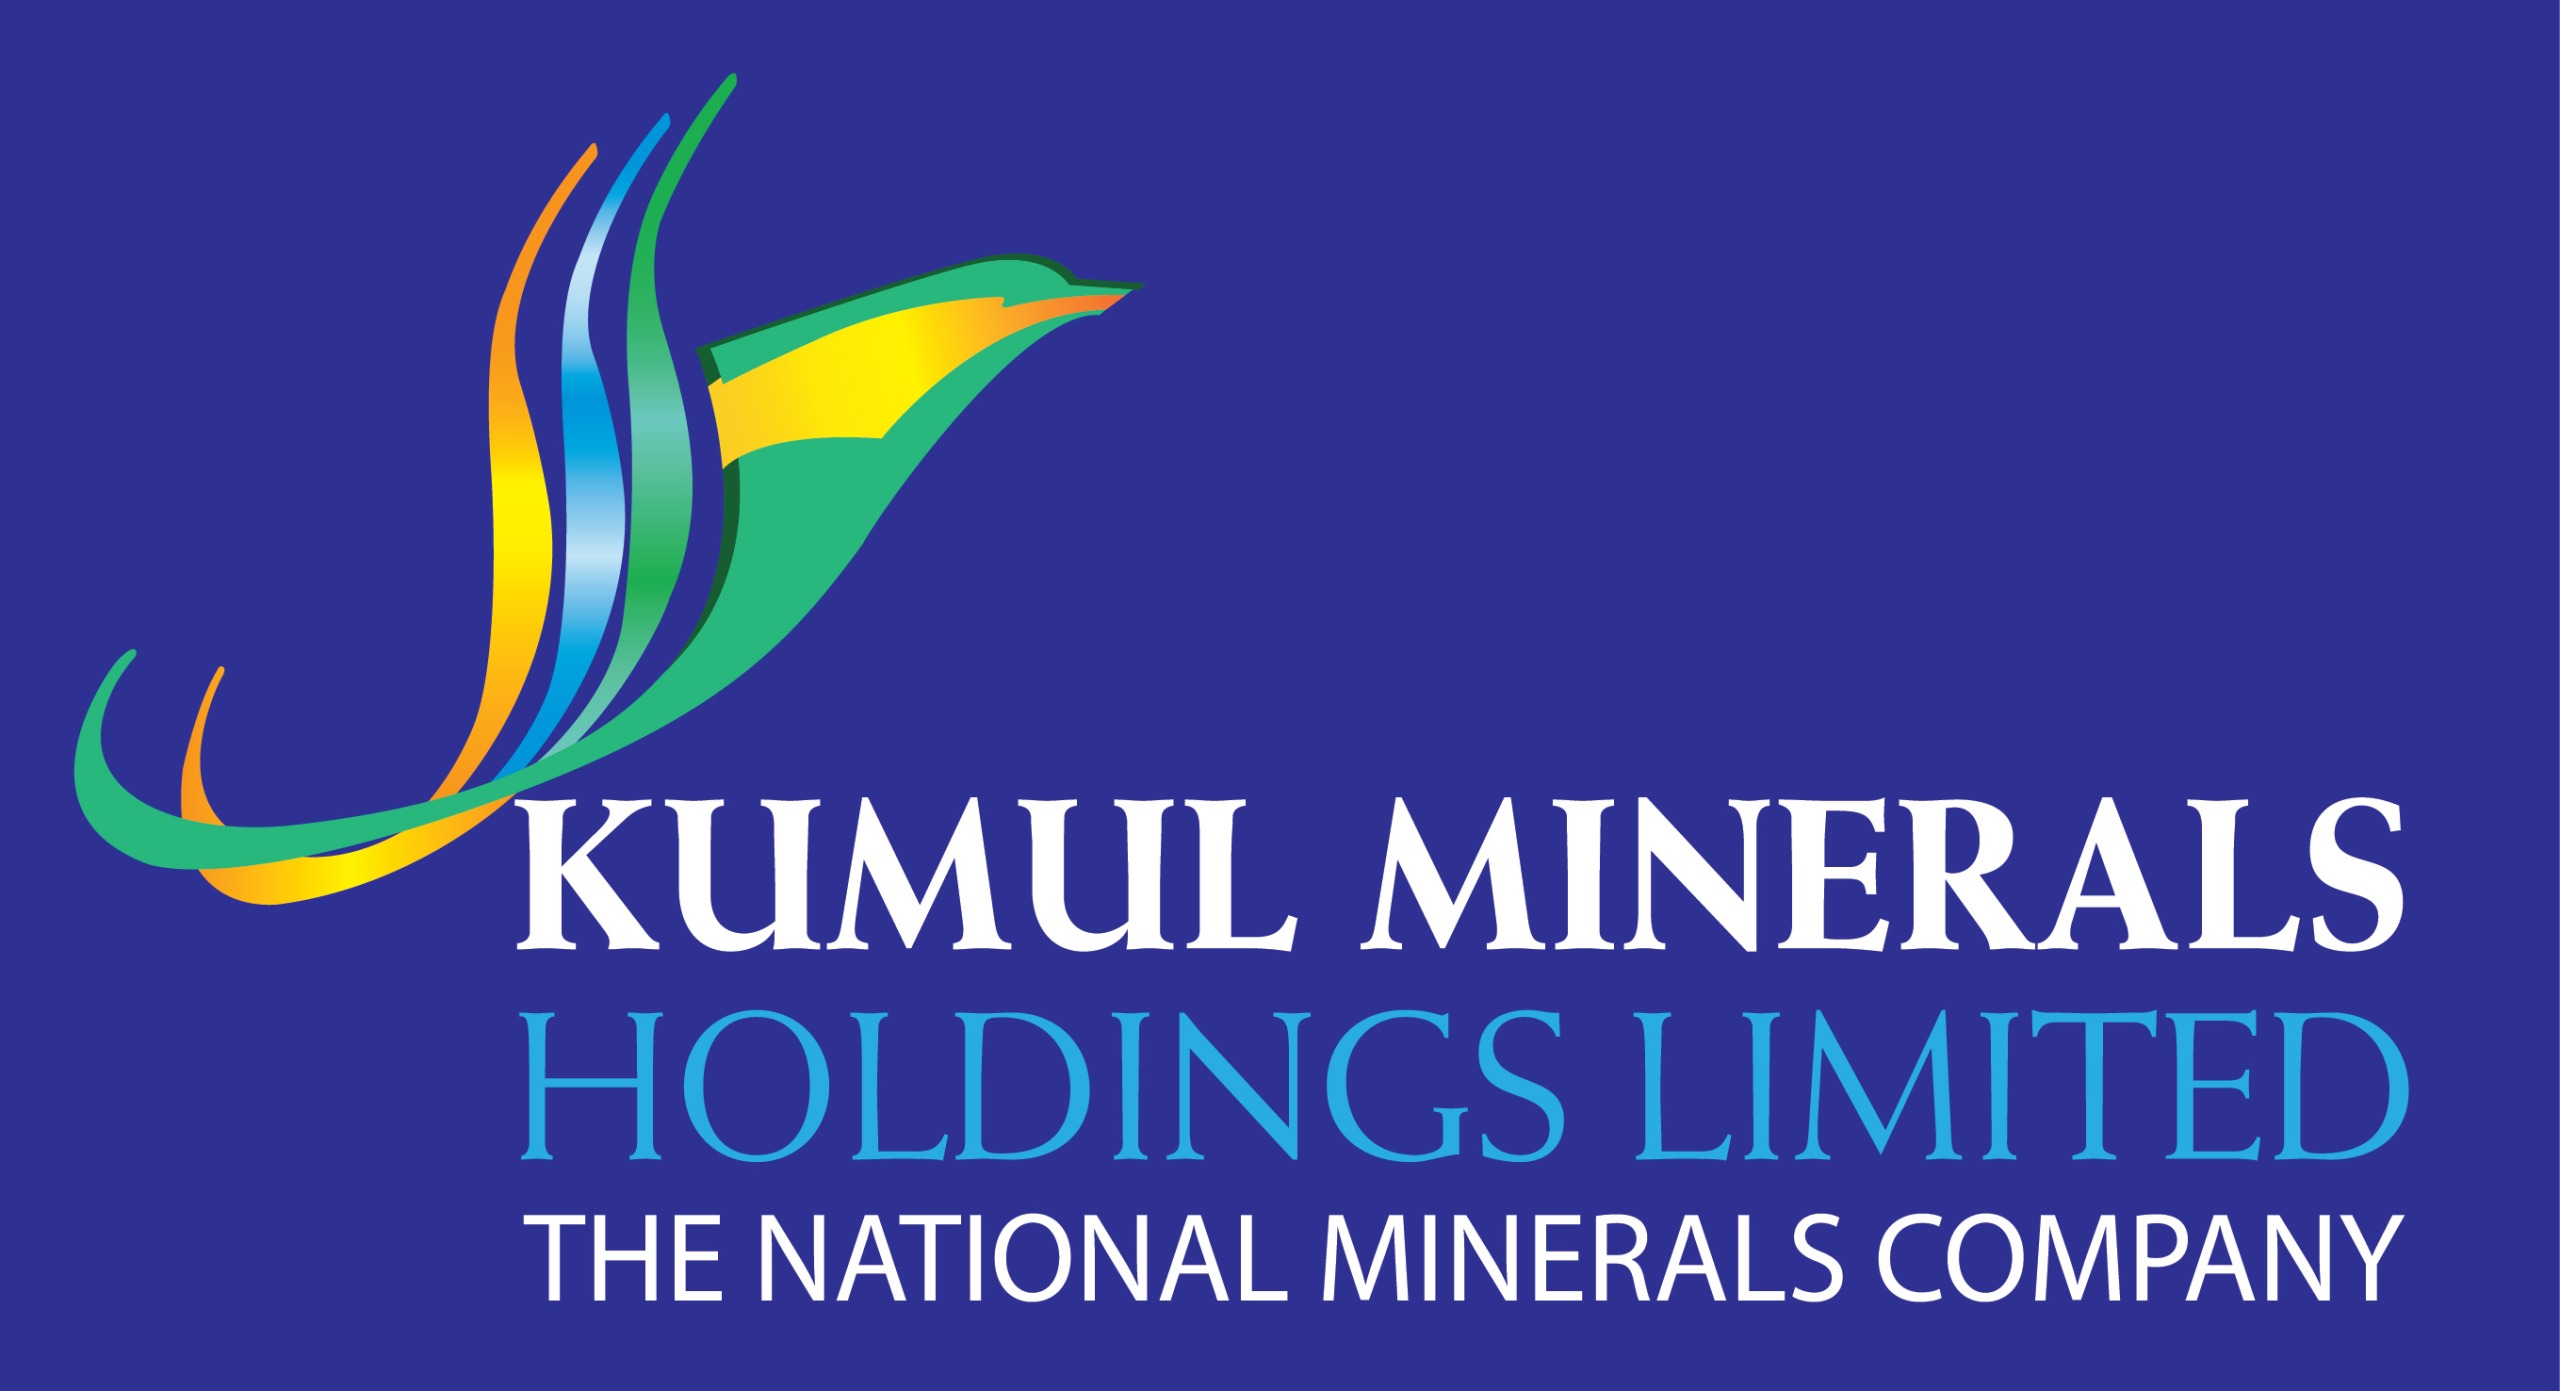 Kumul Minerals Holdings Limited